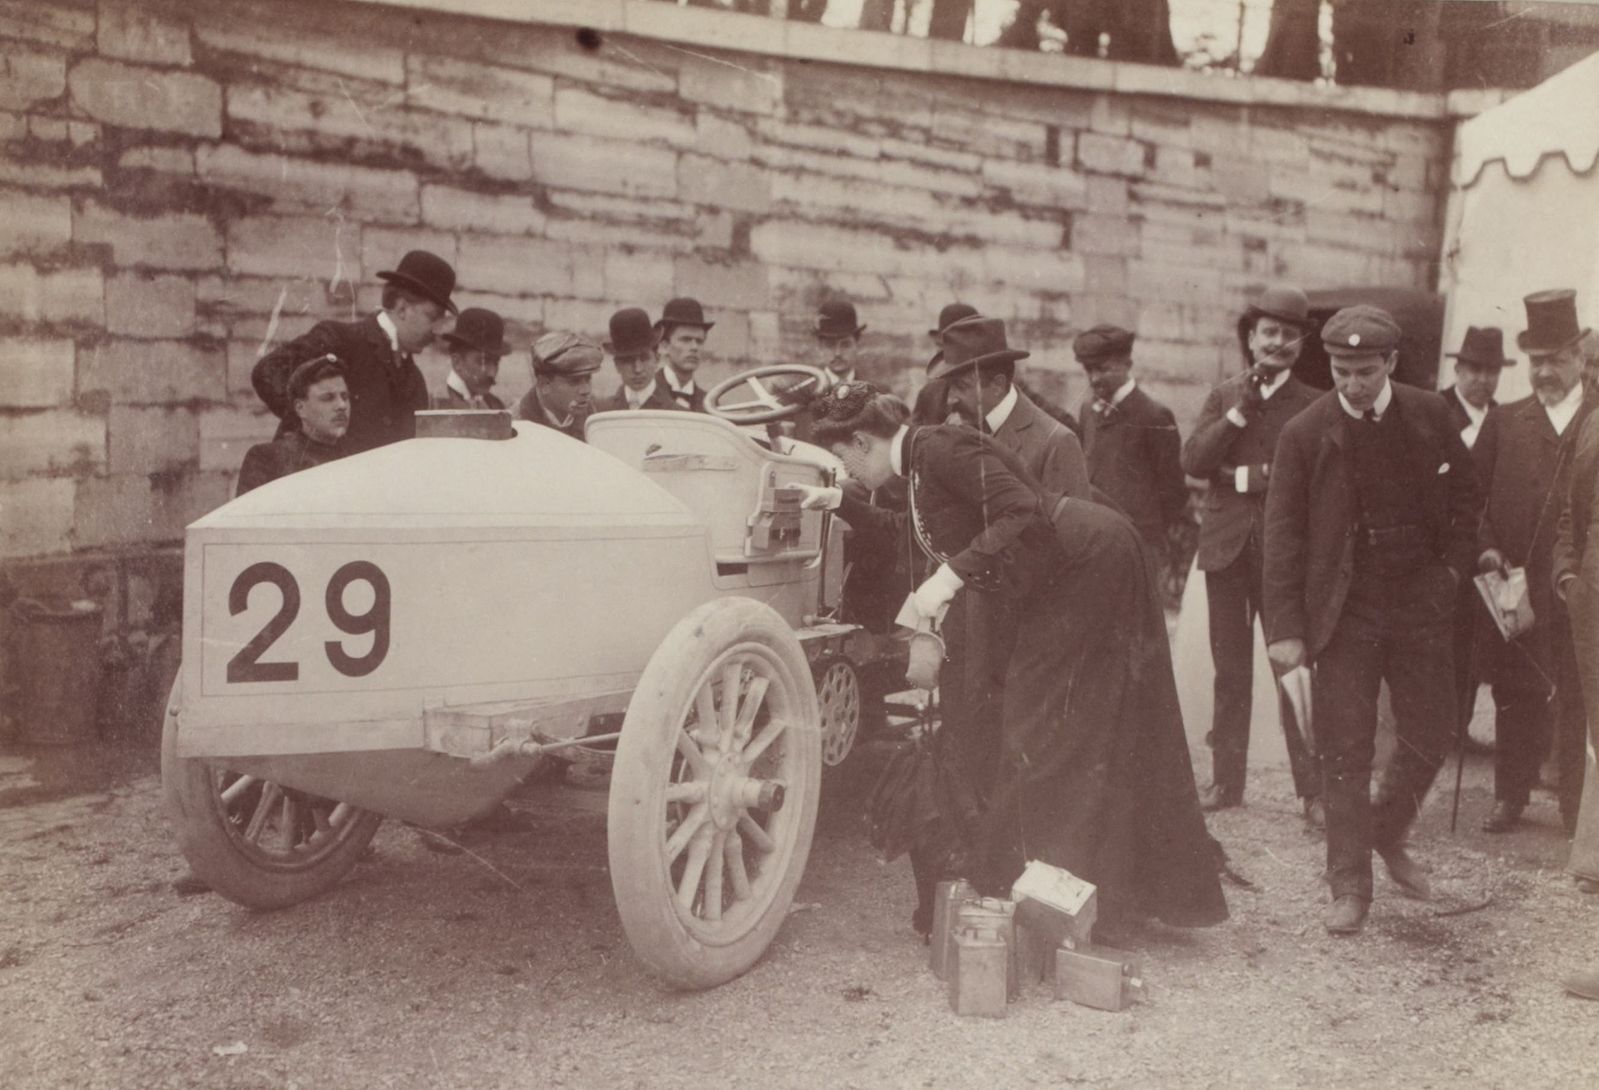 The Valkyrie Of The Motorcar Survived The Race Of Death, A Sunken Ship And An Assassination Attempt